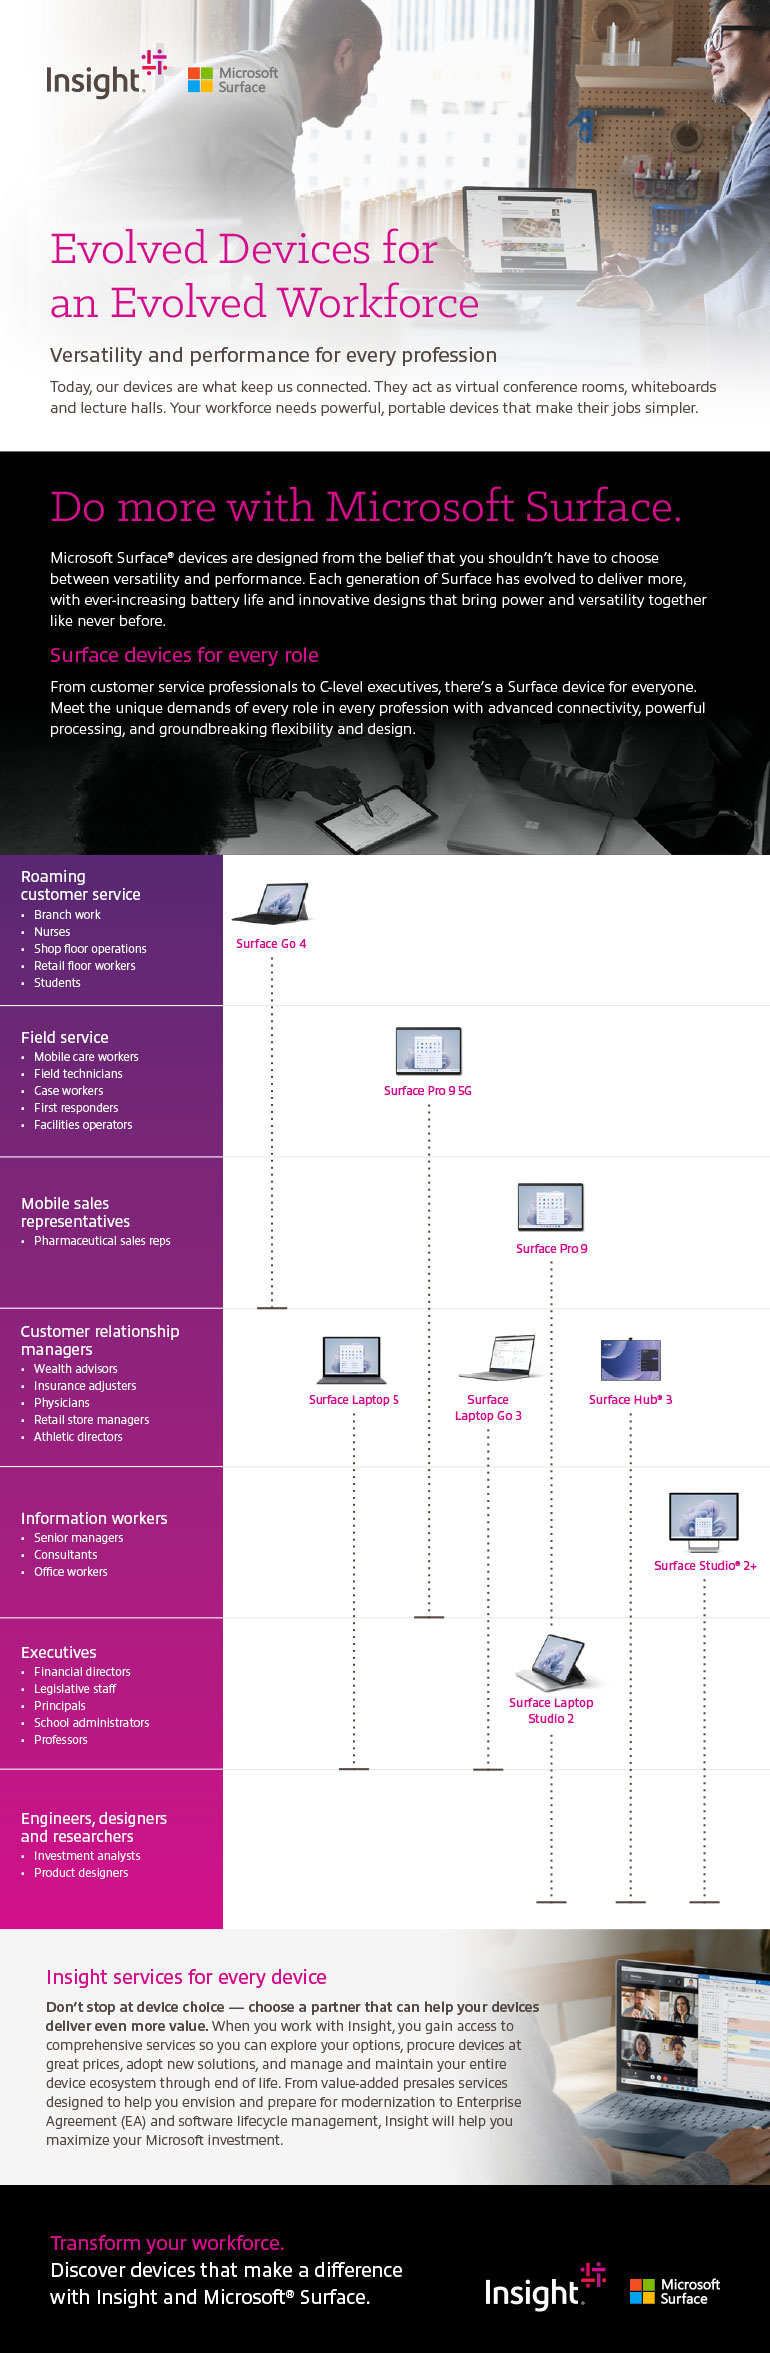 Microsoft Surface Evolved Devices for an Evolved Workforce infographic as transcribed below